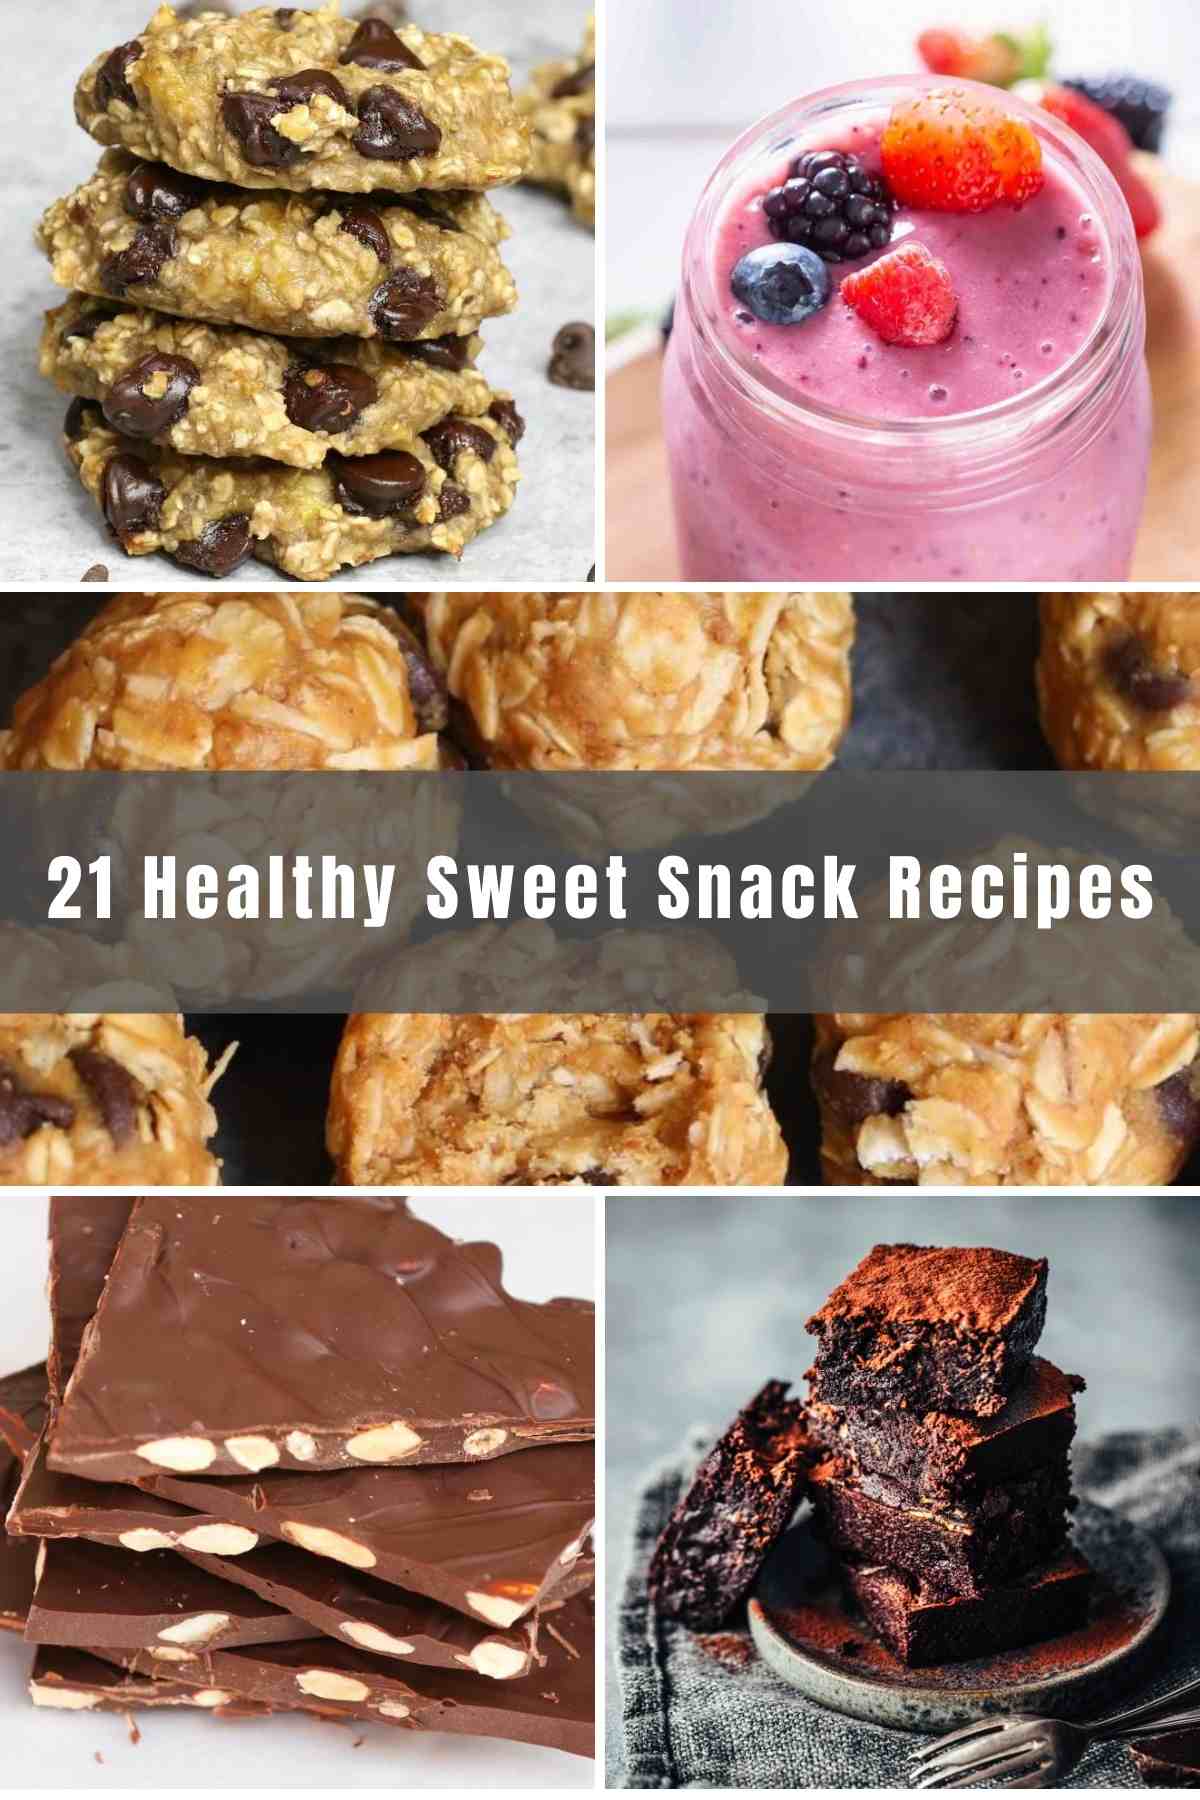 We’ve rounded up 21 Healthy Sweet Snack Recipes for you to maintain a healthy lifestyle. Instead of forcing yourself to avoid your sugary cravings, embrace your sweet tooth with these tasty, guilt-free snack options.